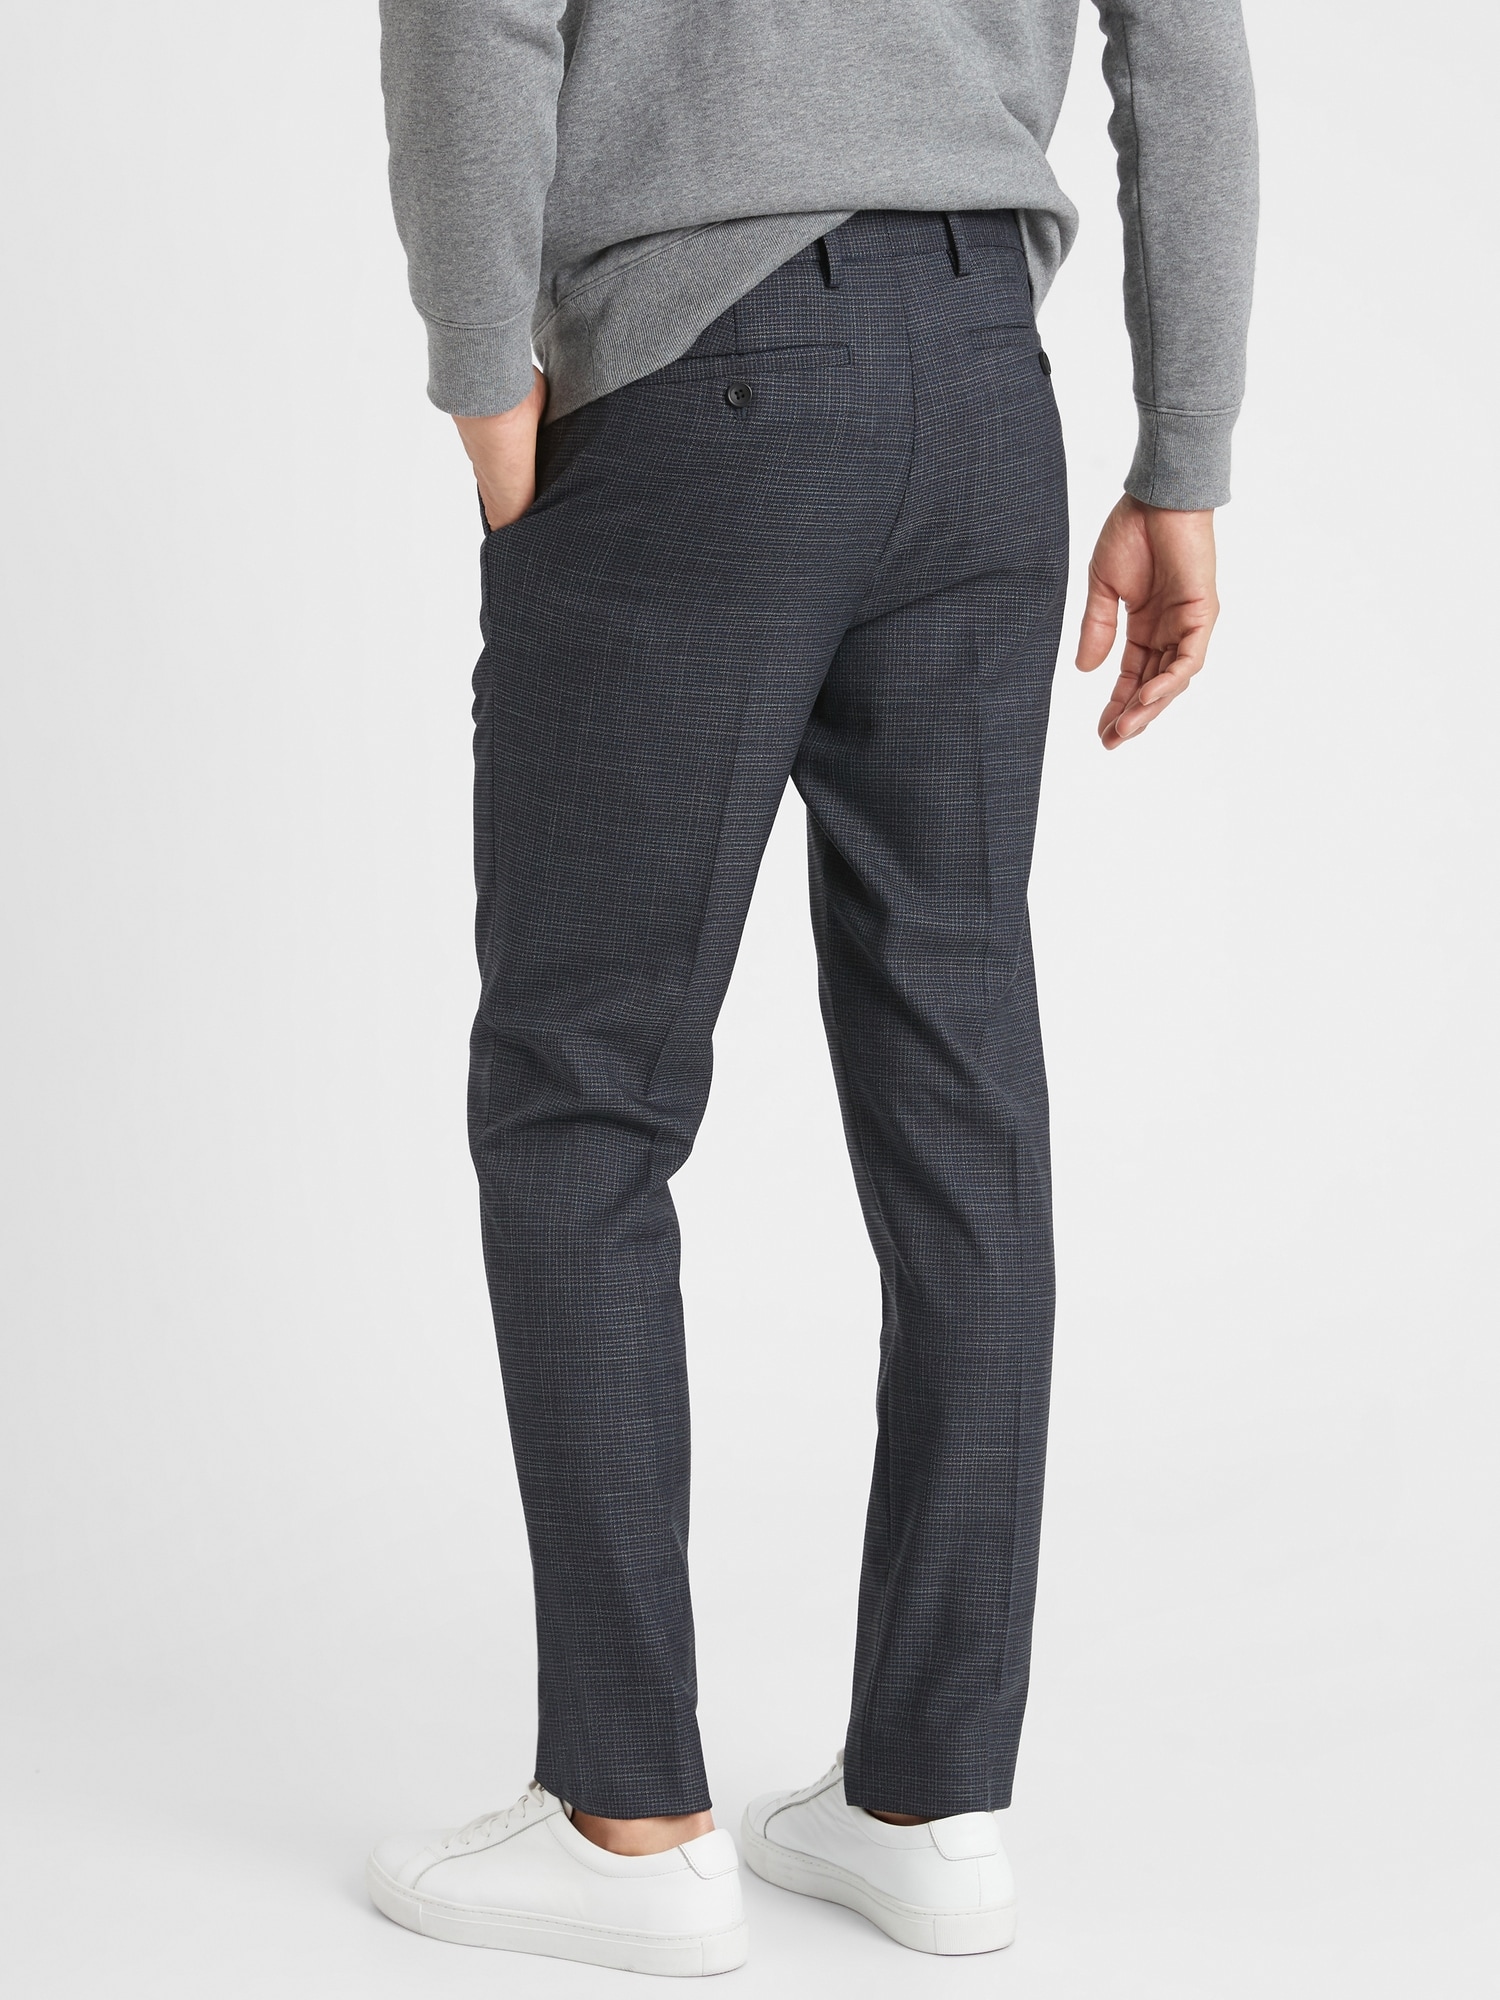 Slim-Fit Wrinkle-Resistant Houndstooth Pant | Banana Republic Factory